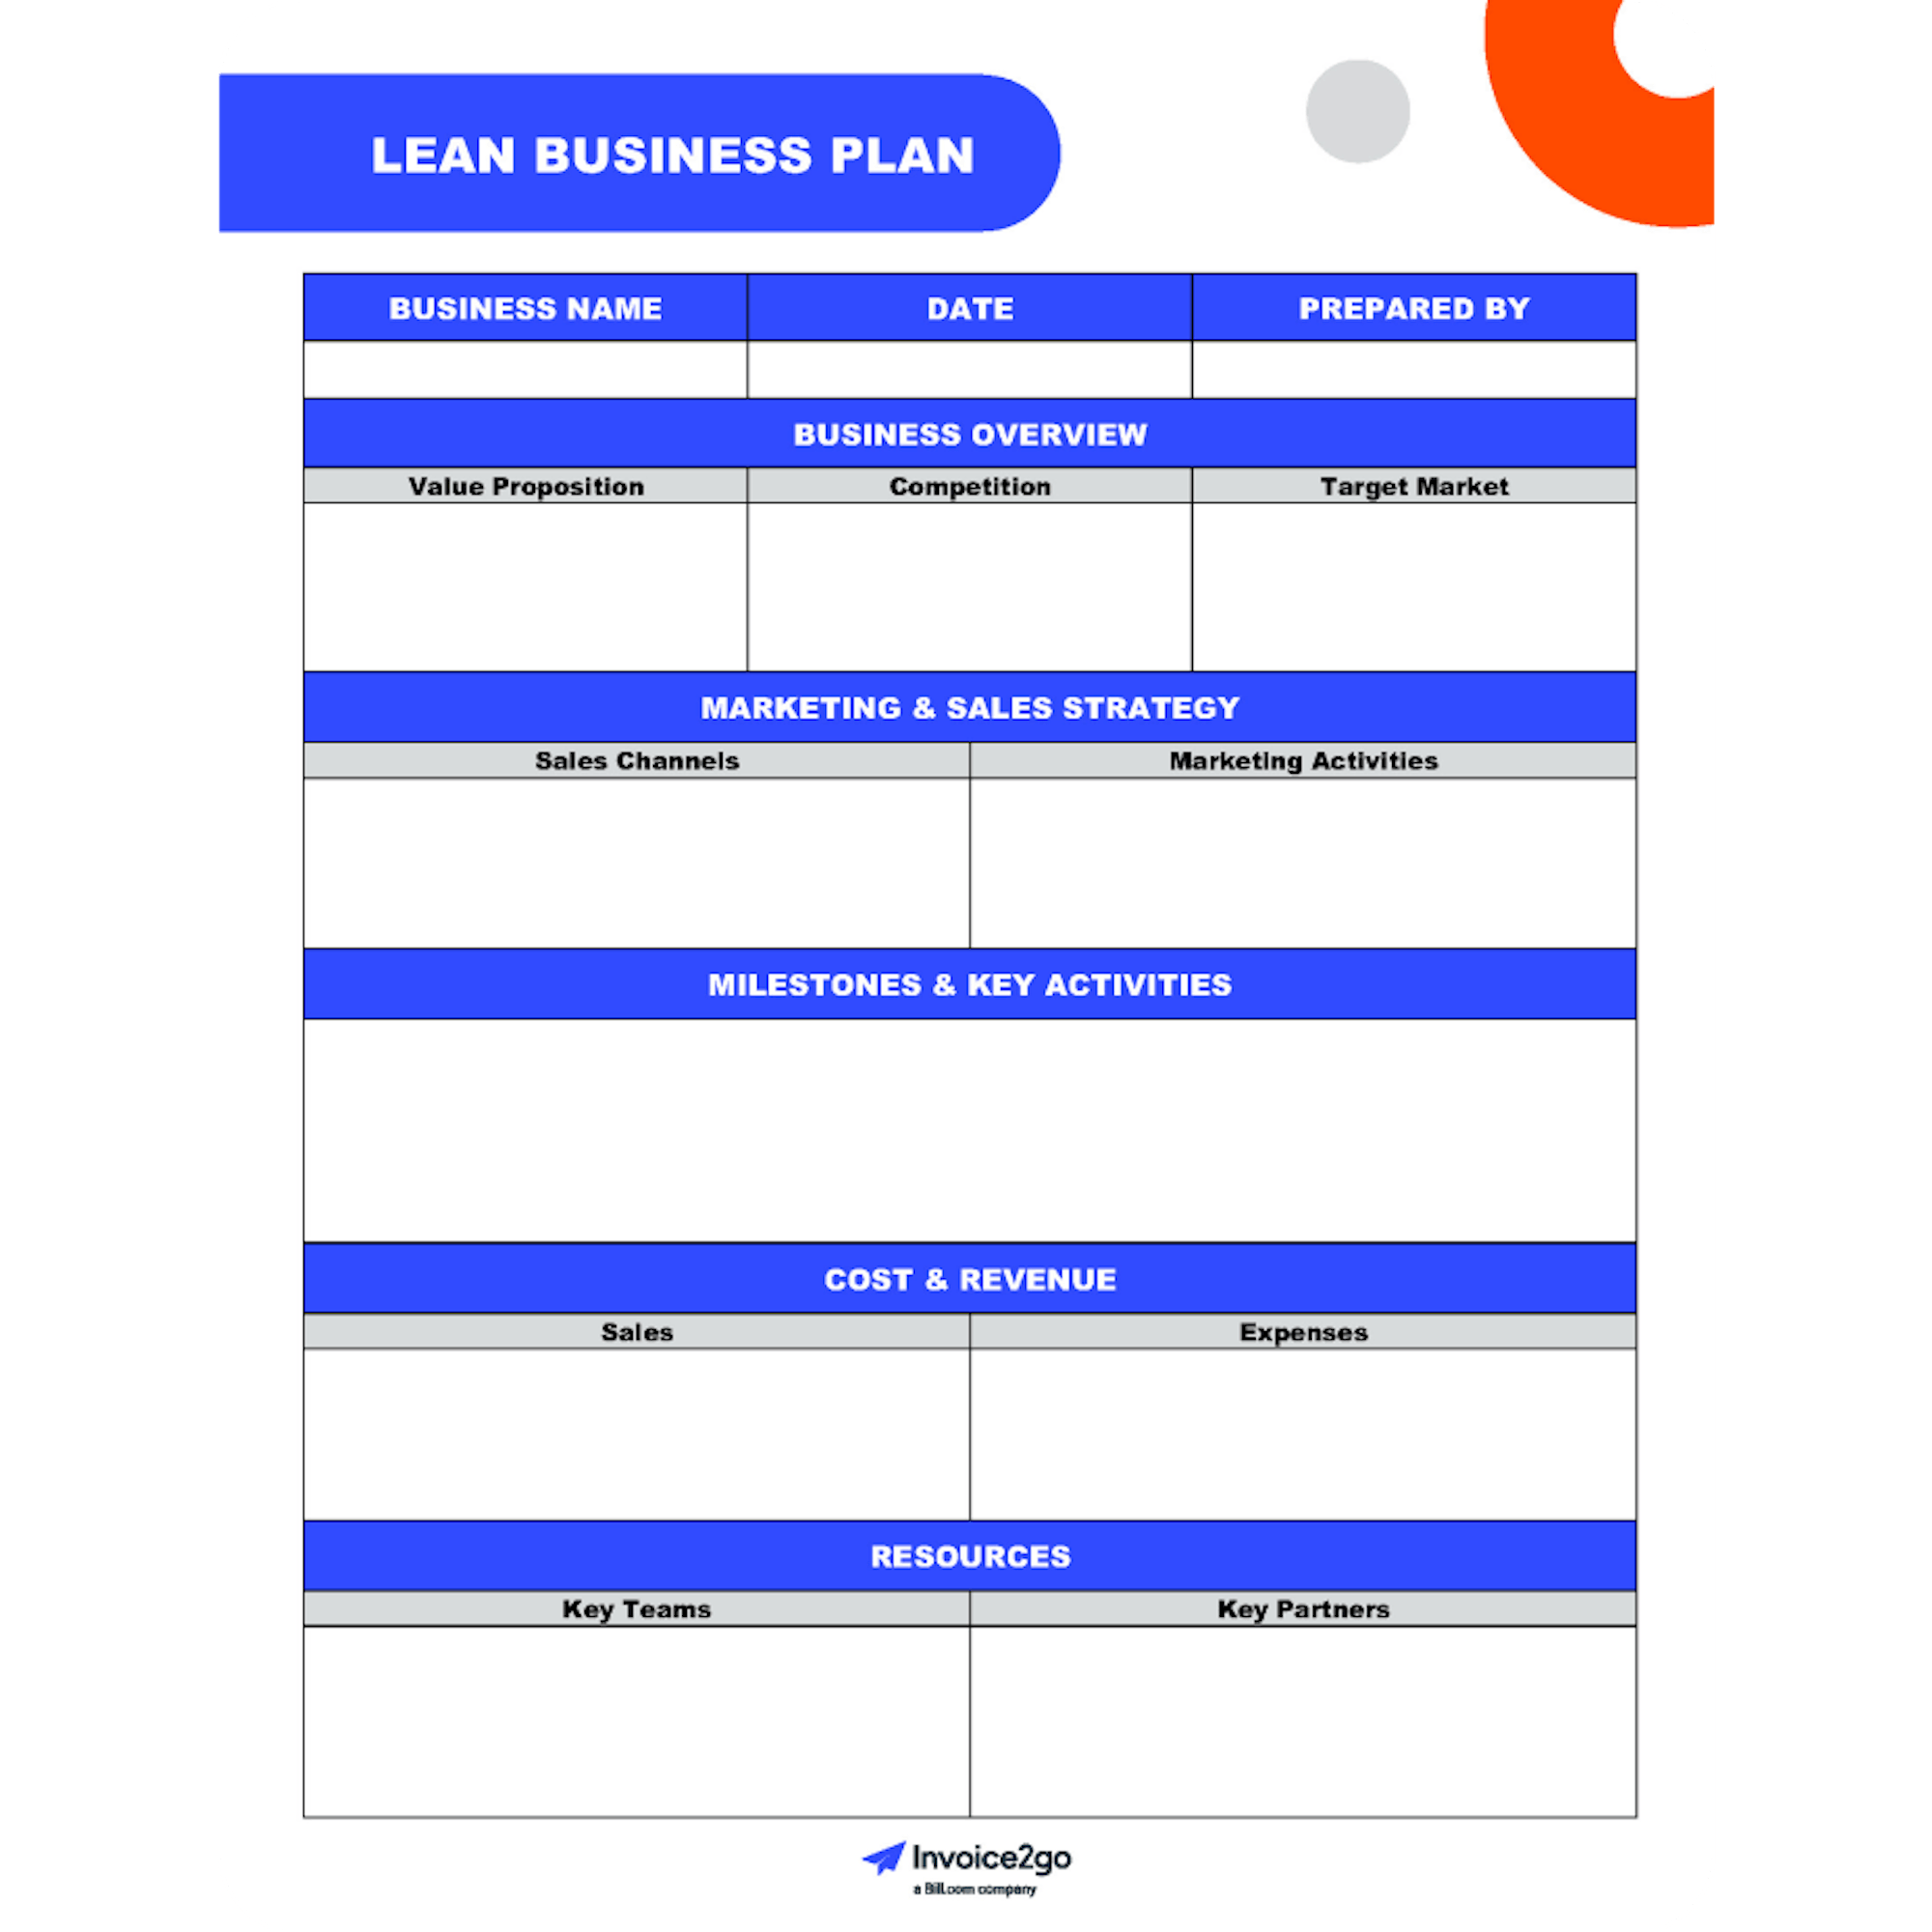 lean business plan template free download